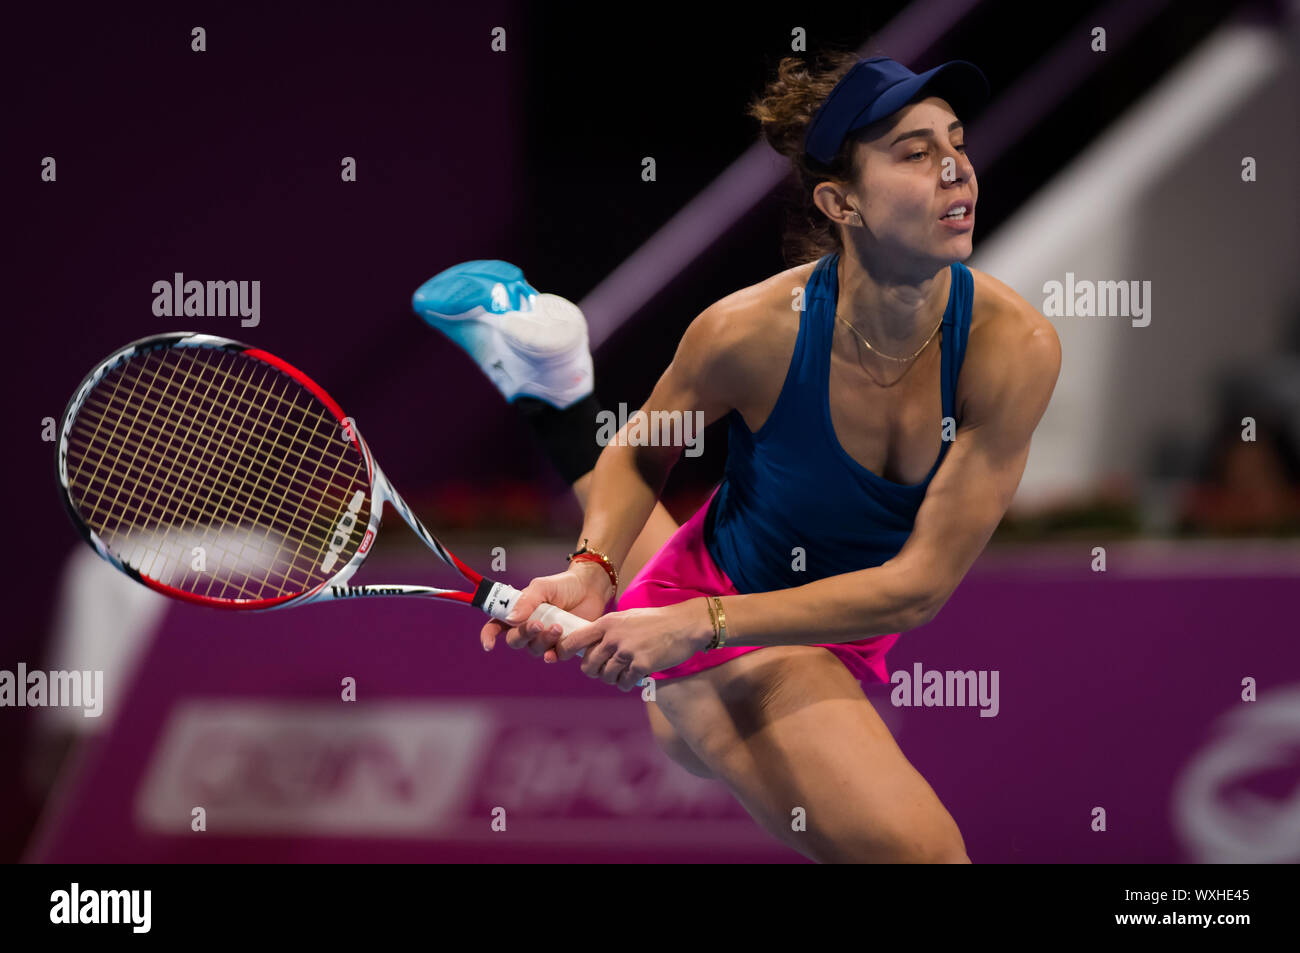 Mihaela Buzarnescu Of Romania In Action During The First Round At The 2019 Qatar Total Open Wta Premier Tennis Tournament Stock Photo Alamy